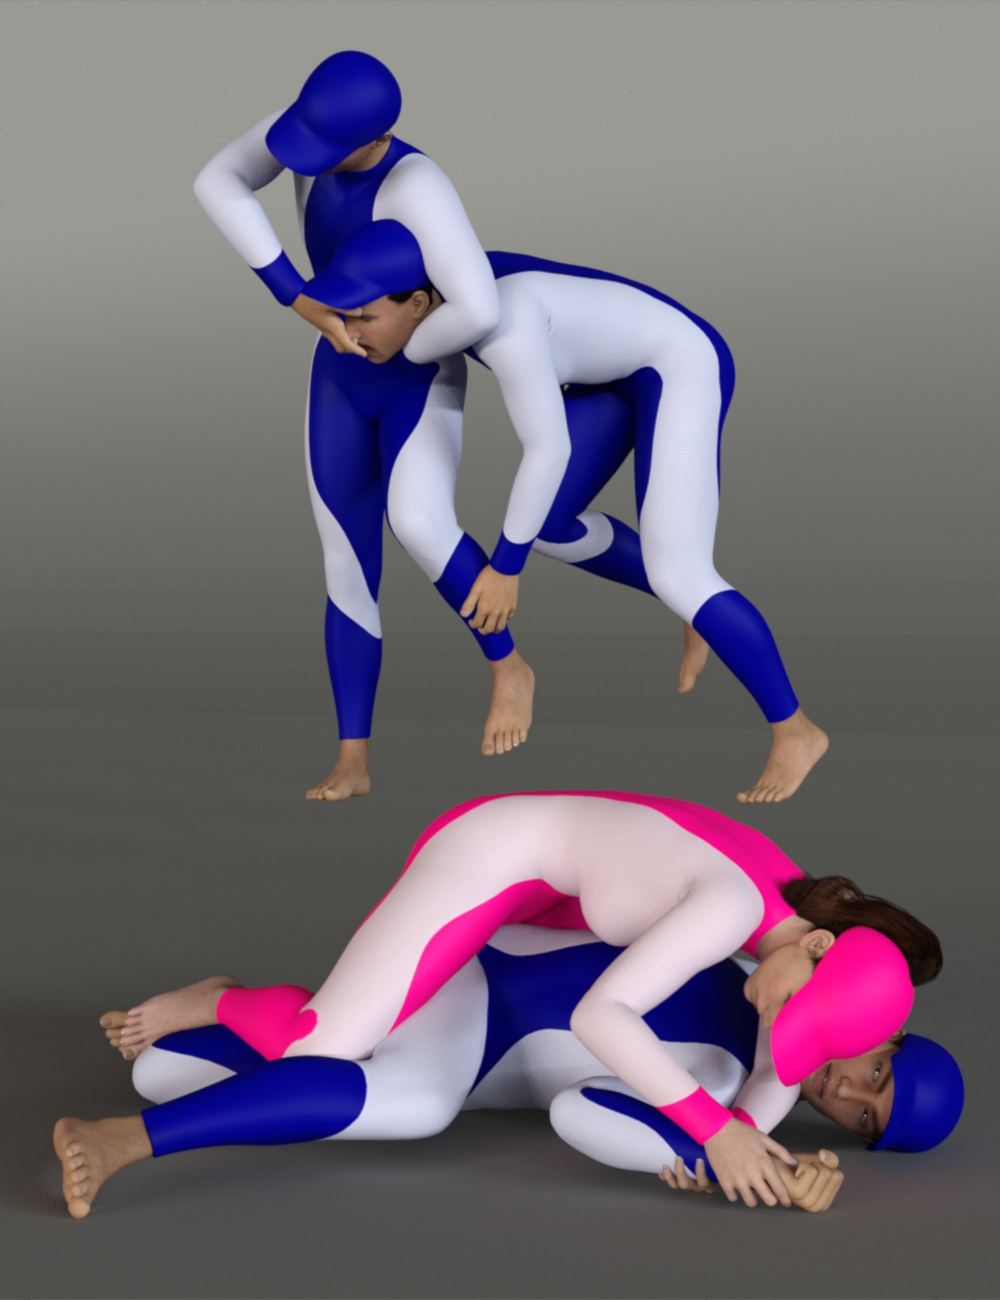 Grappling Poses Volume 2 for Genesis 8 and 8.1 by: atrilliongames, 3D Models by Daz 3D